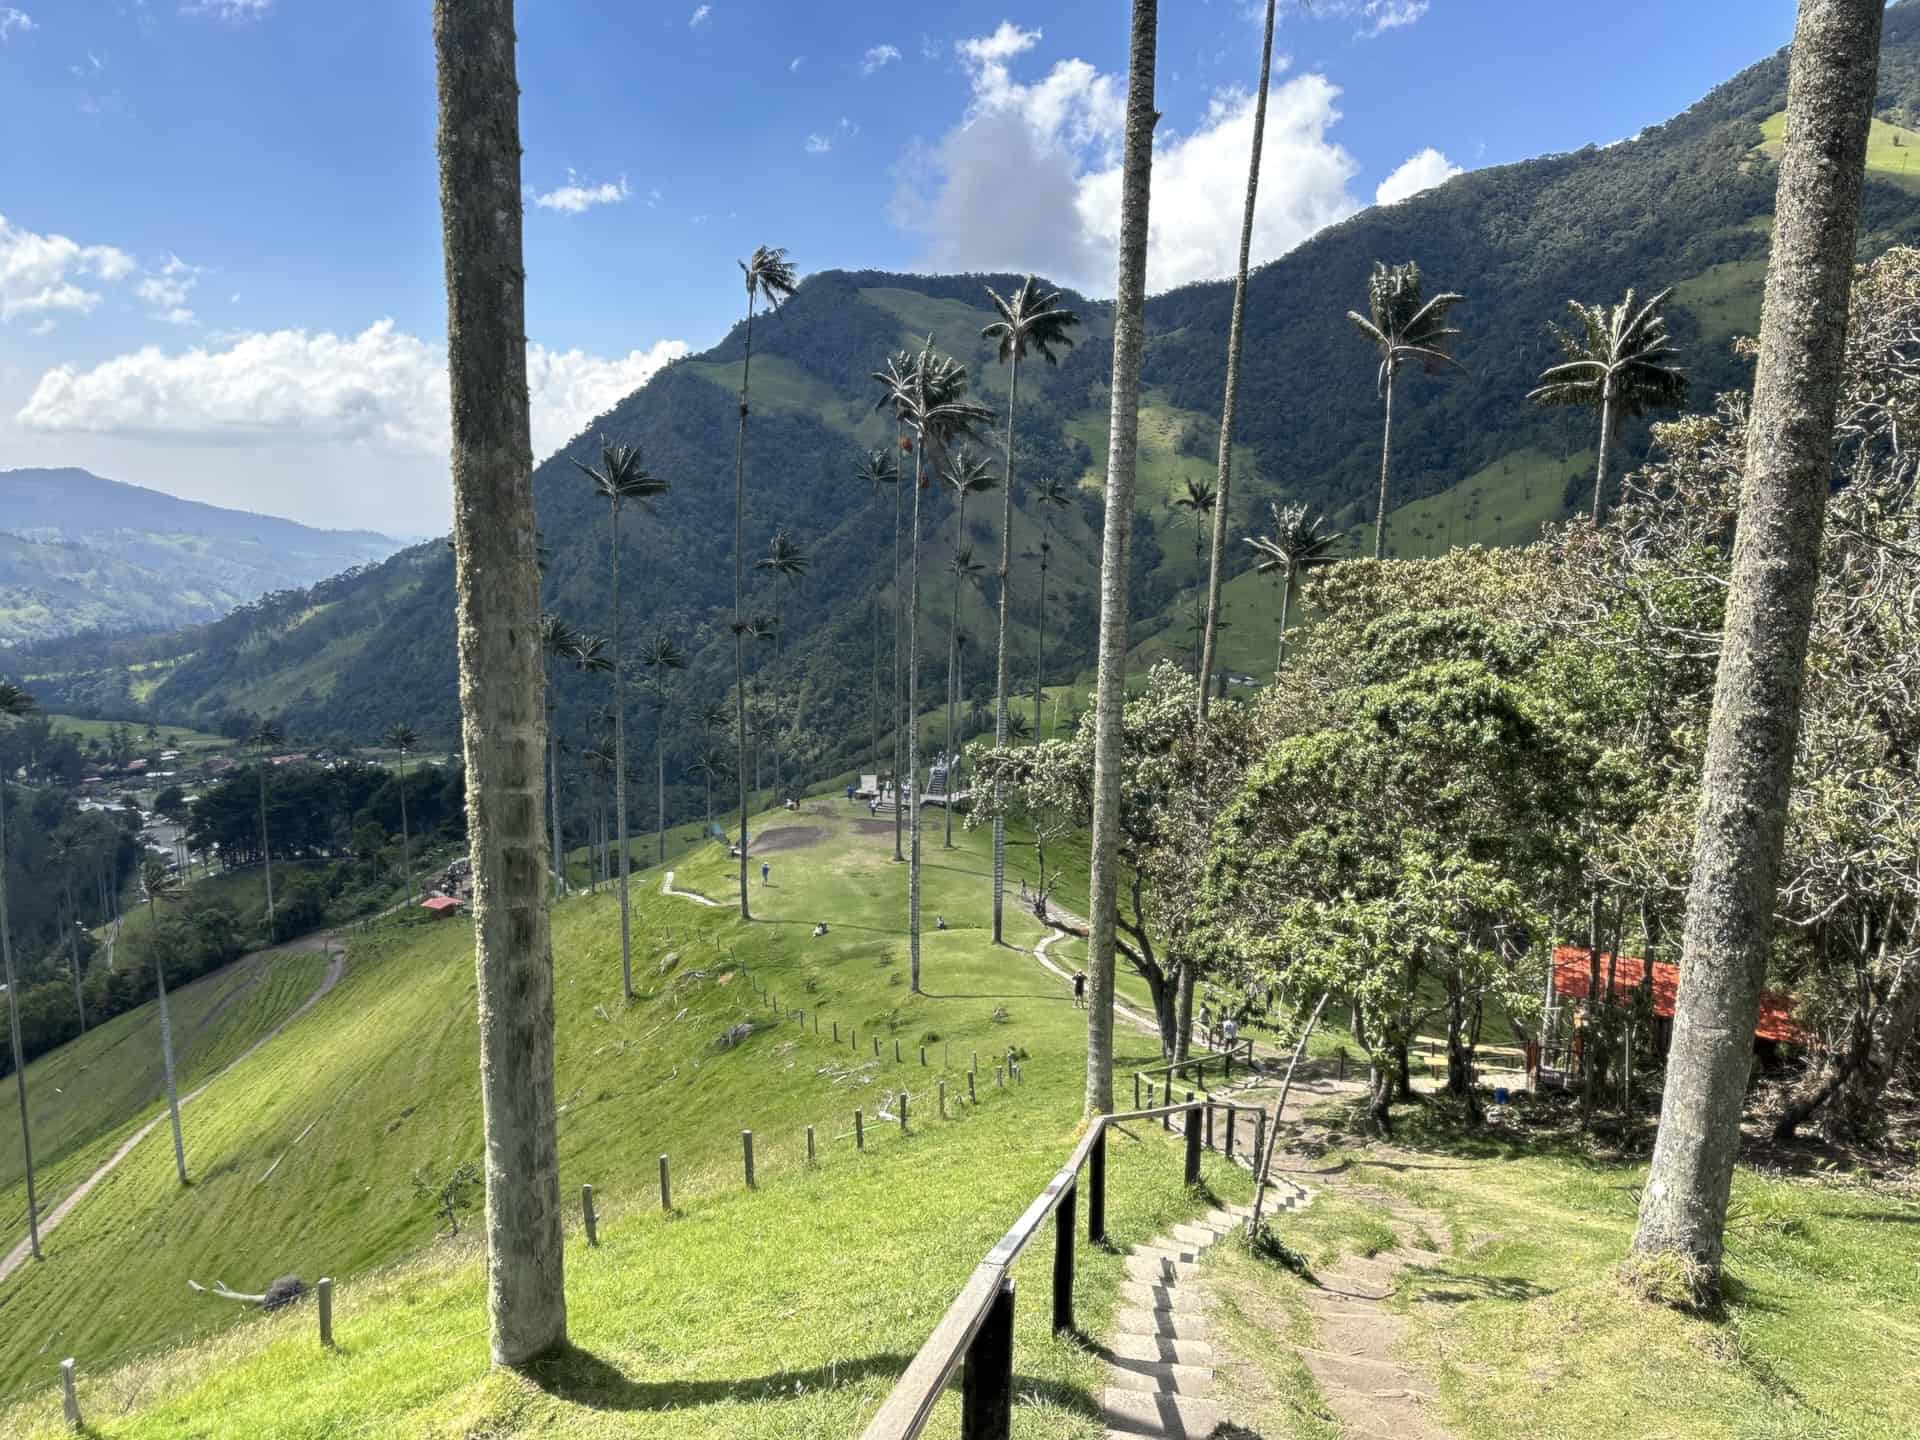 Walking down to the Palm Forest from Mirador #1 at Cocora Valley in Quindío, Colombia